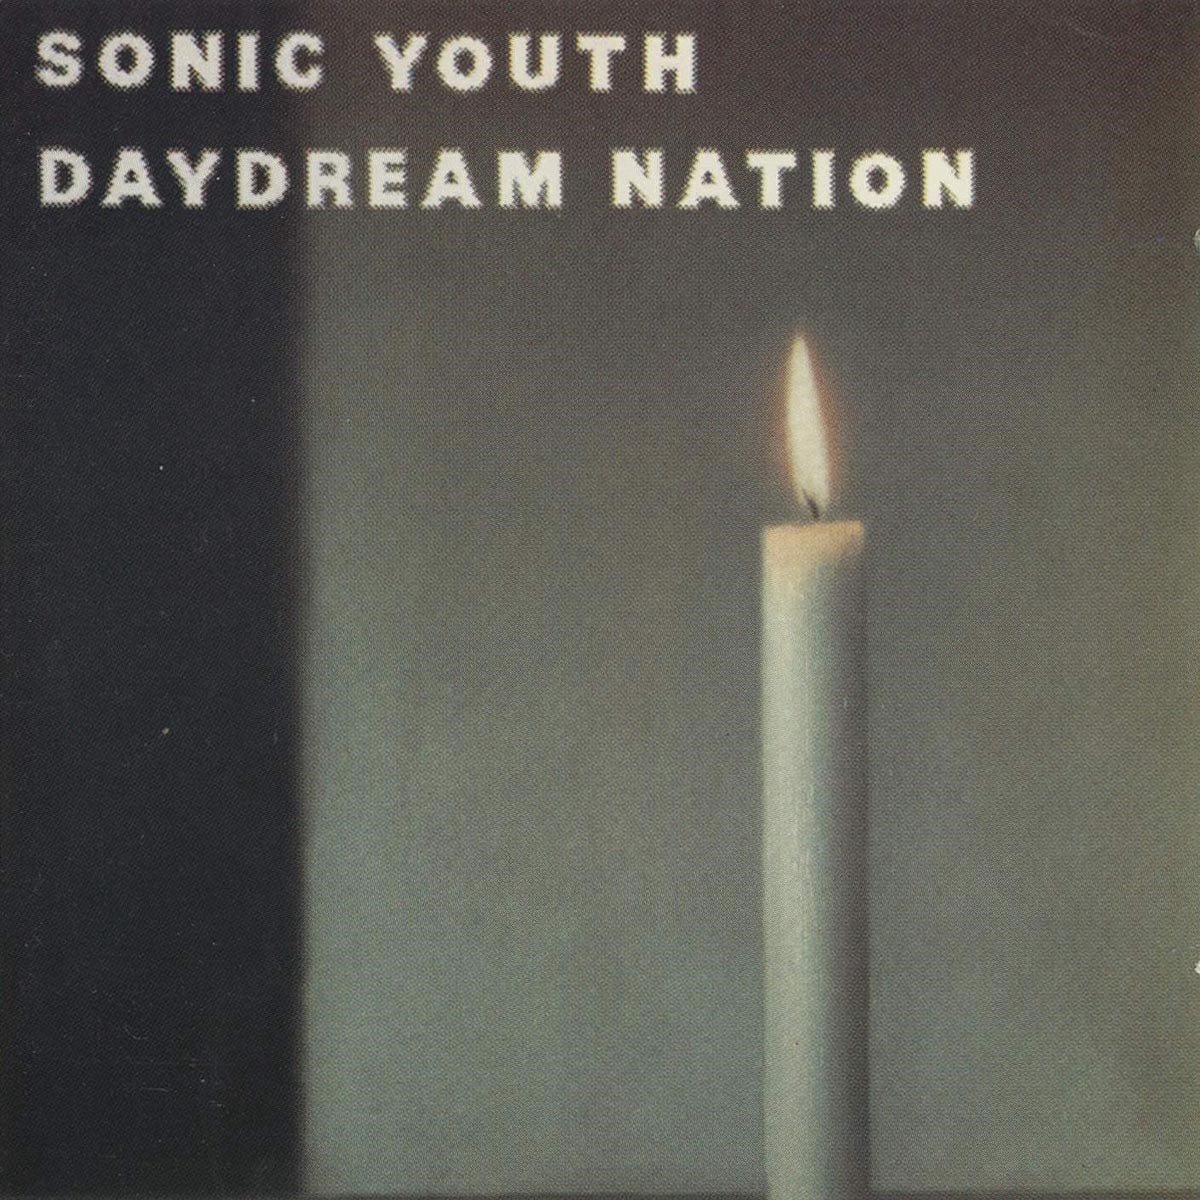 Sonic Youth - Daydream Nation (CD) - Sonic Youth